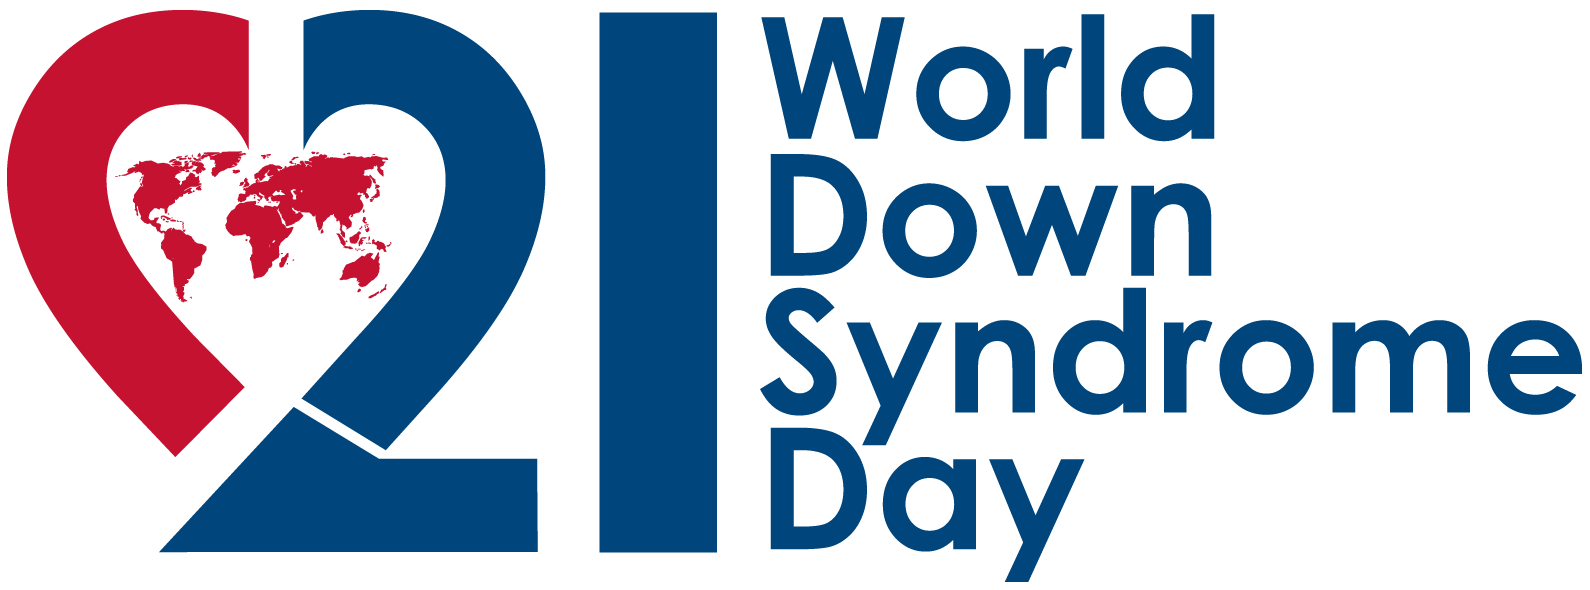 Home - World Down Syndrome Day